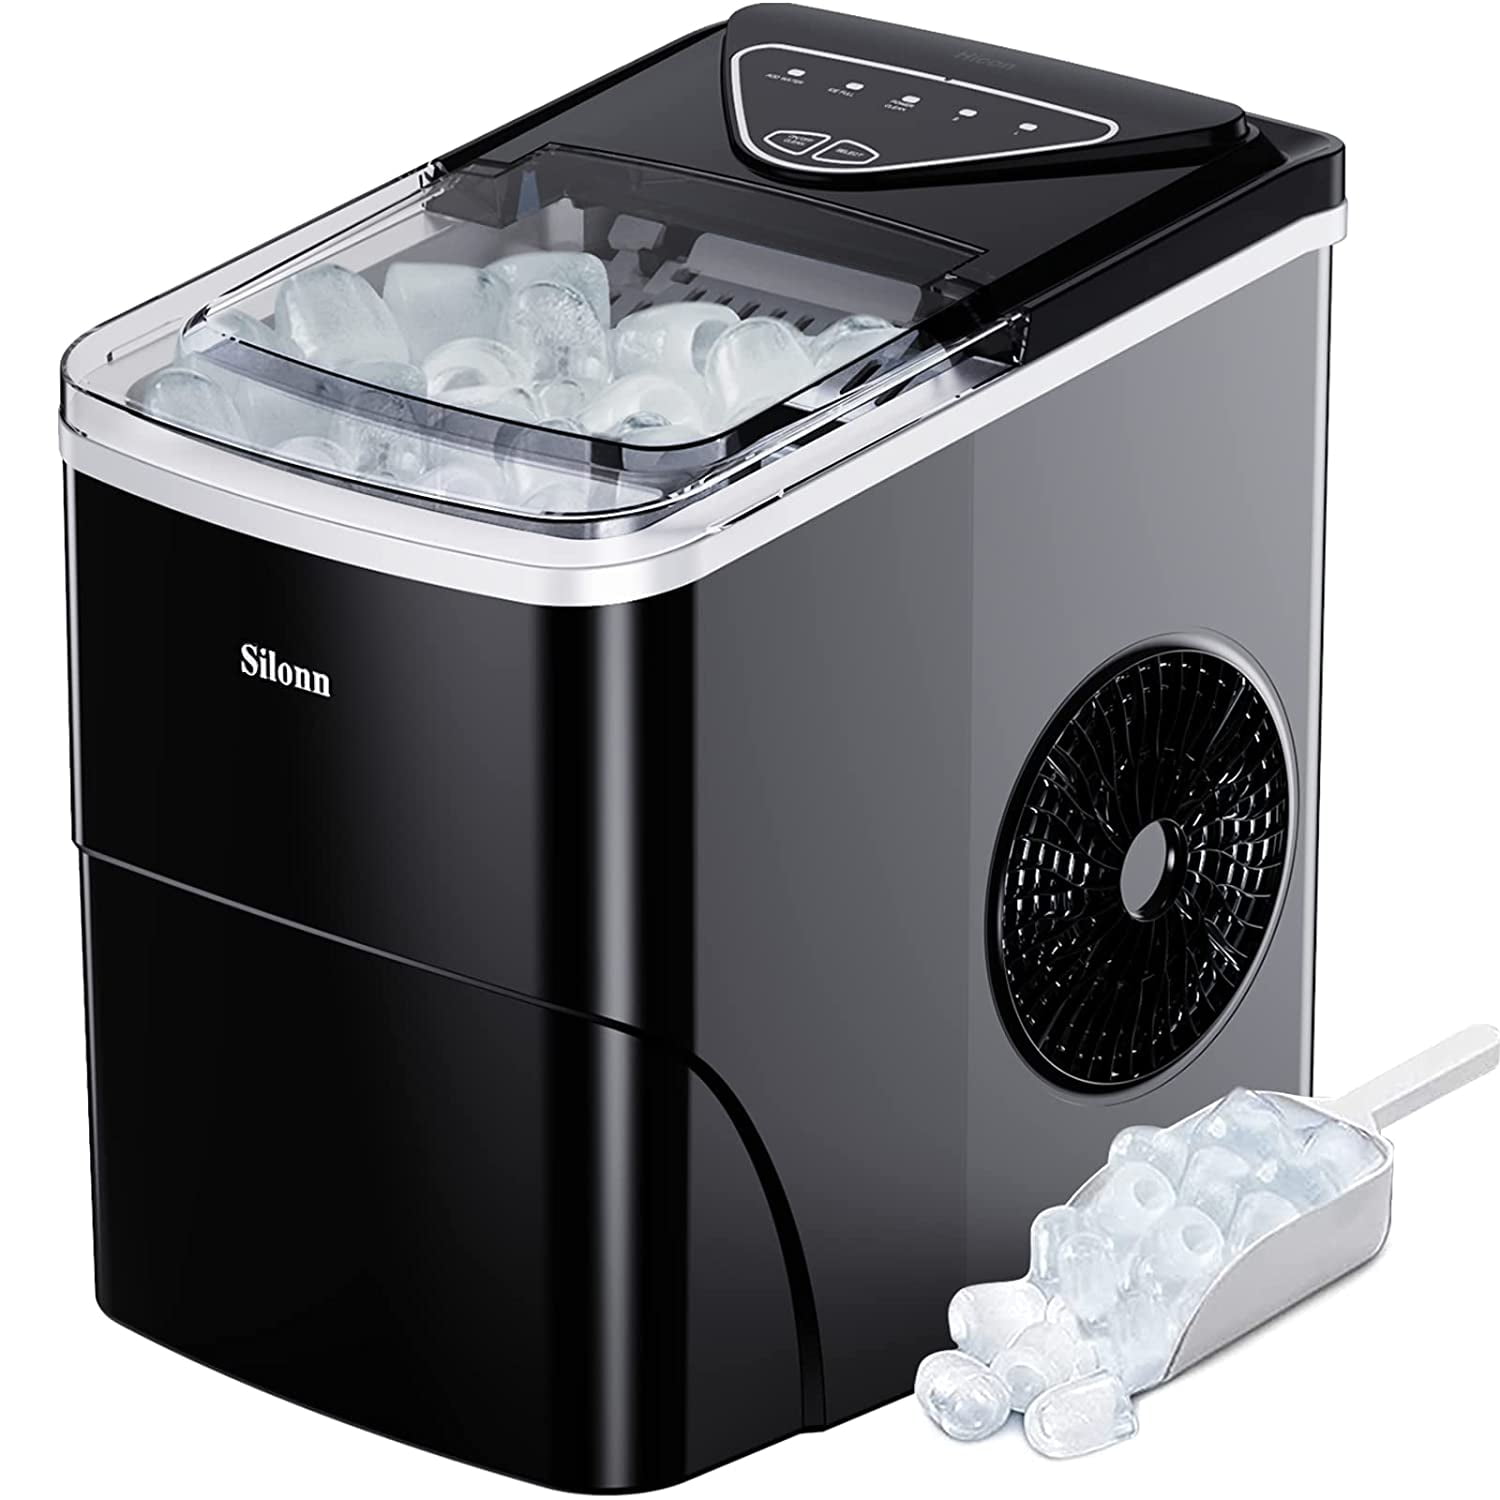 Silonn Countertop Ice Maker, 45lbs Per Day, 24Pcs Ice Cubes in 13 Min, 2  Ways to Add Water, Auto Self-Cleaning, Stainless Steel Ice Machine for Home